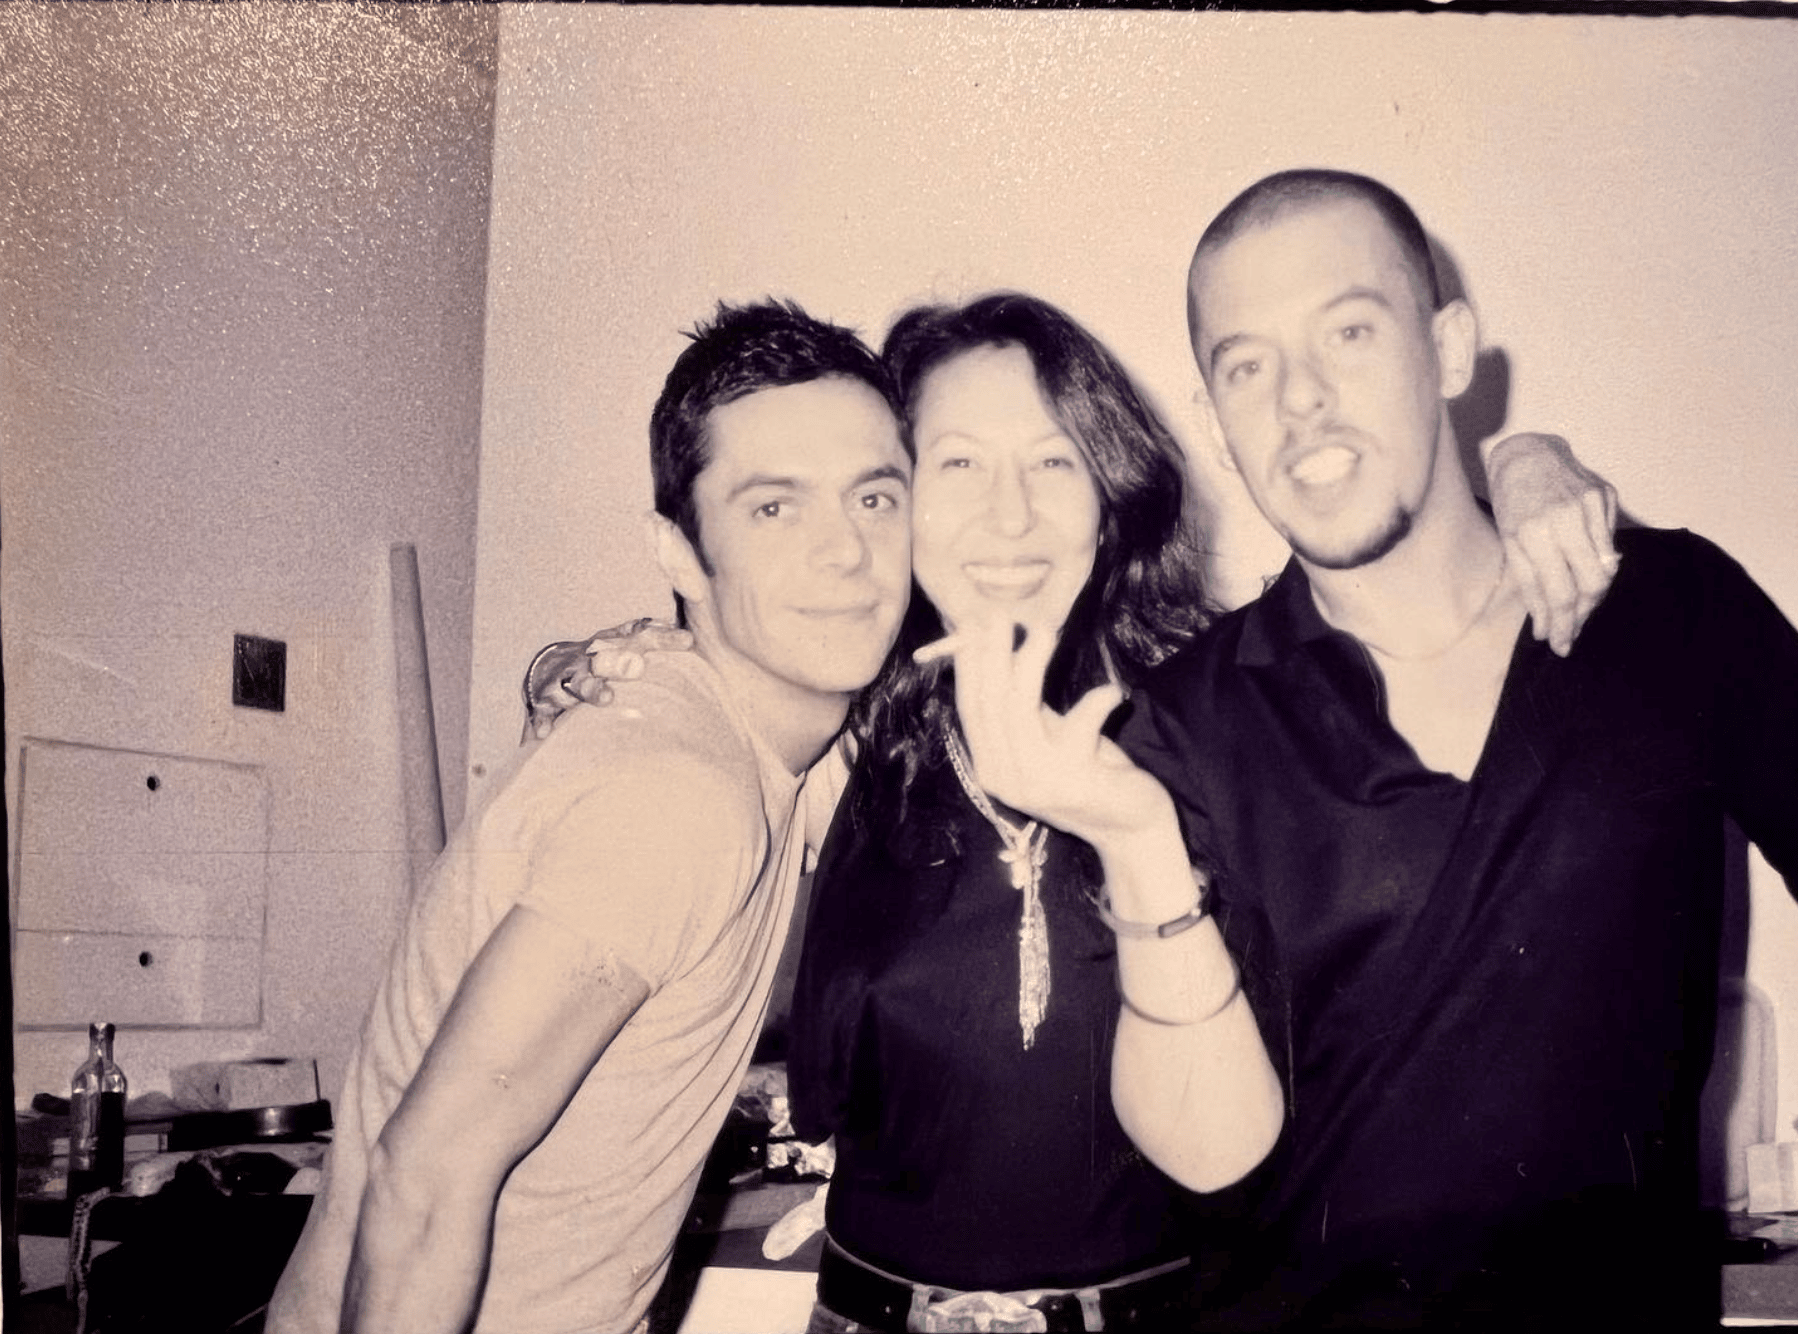 Mira with Shaun Leane and Alexander McQueen